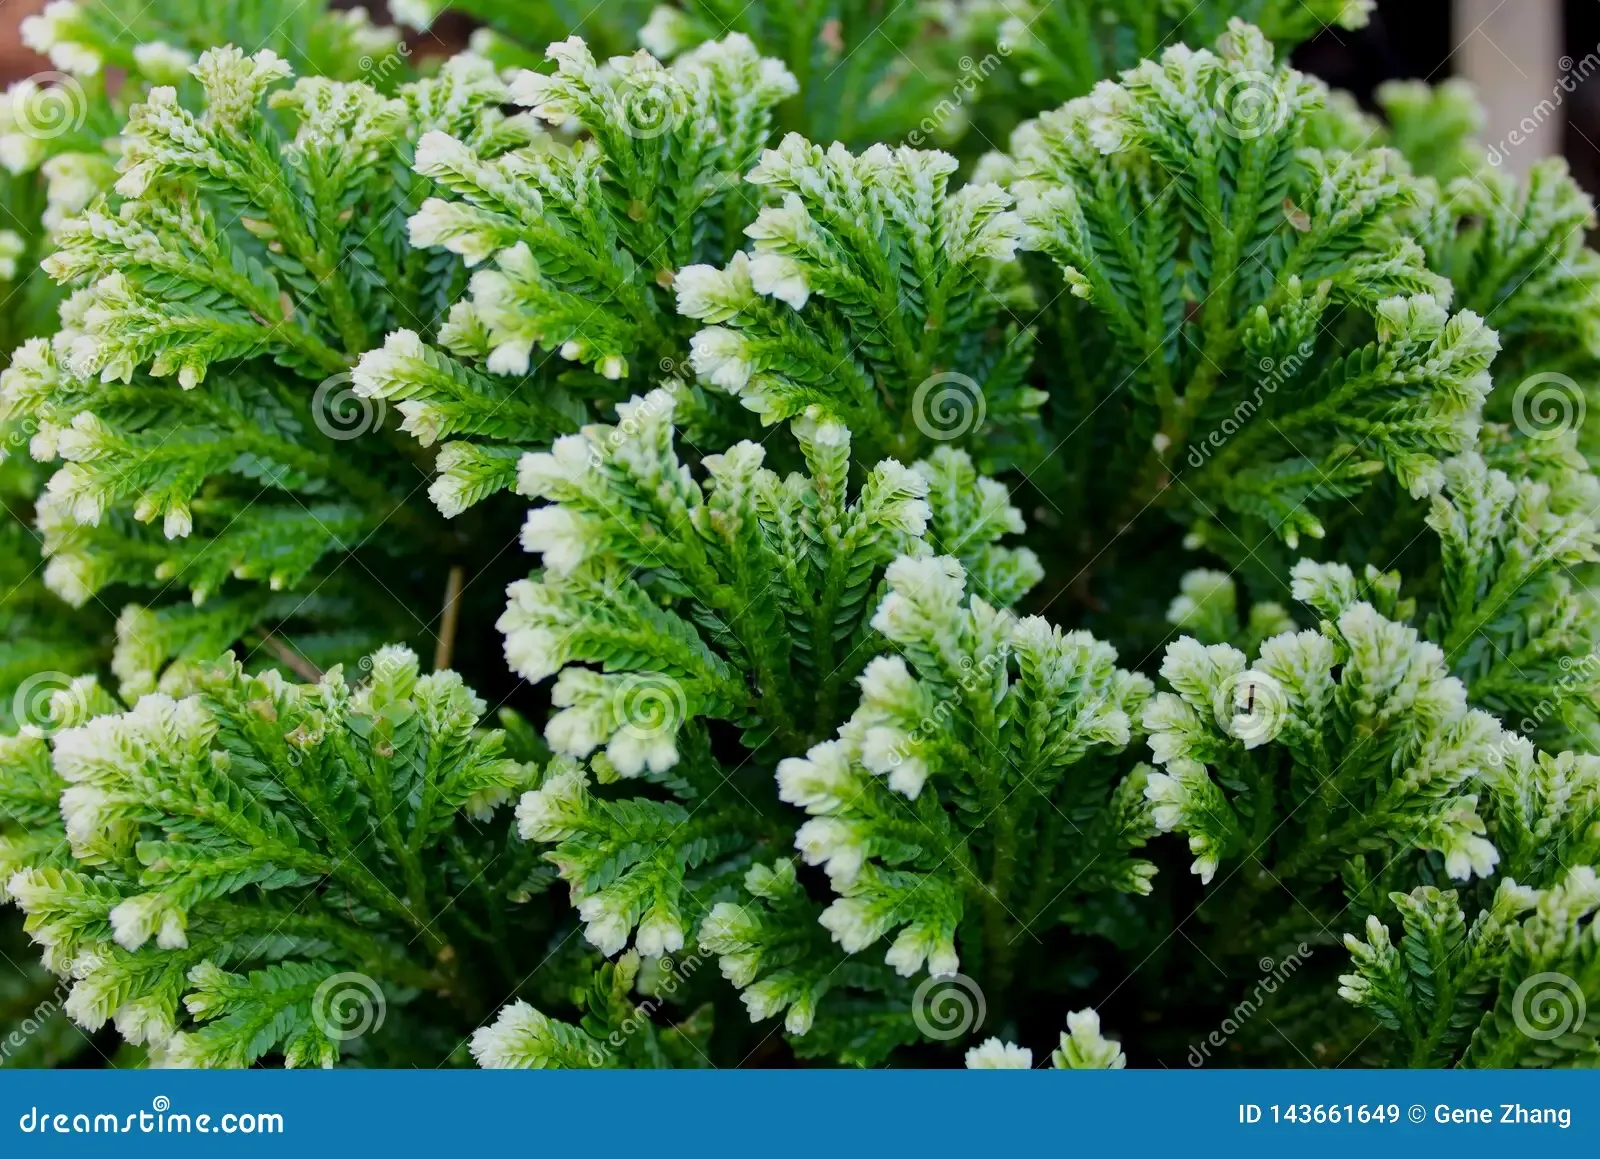 green-leaf-selaginella-bryopteris-tree-thriving-lithophytic-plant-native-to-india-used-medicinally-one-143661649.jpg